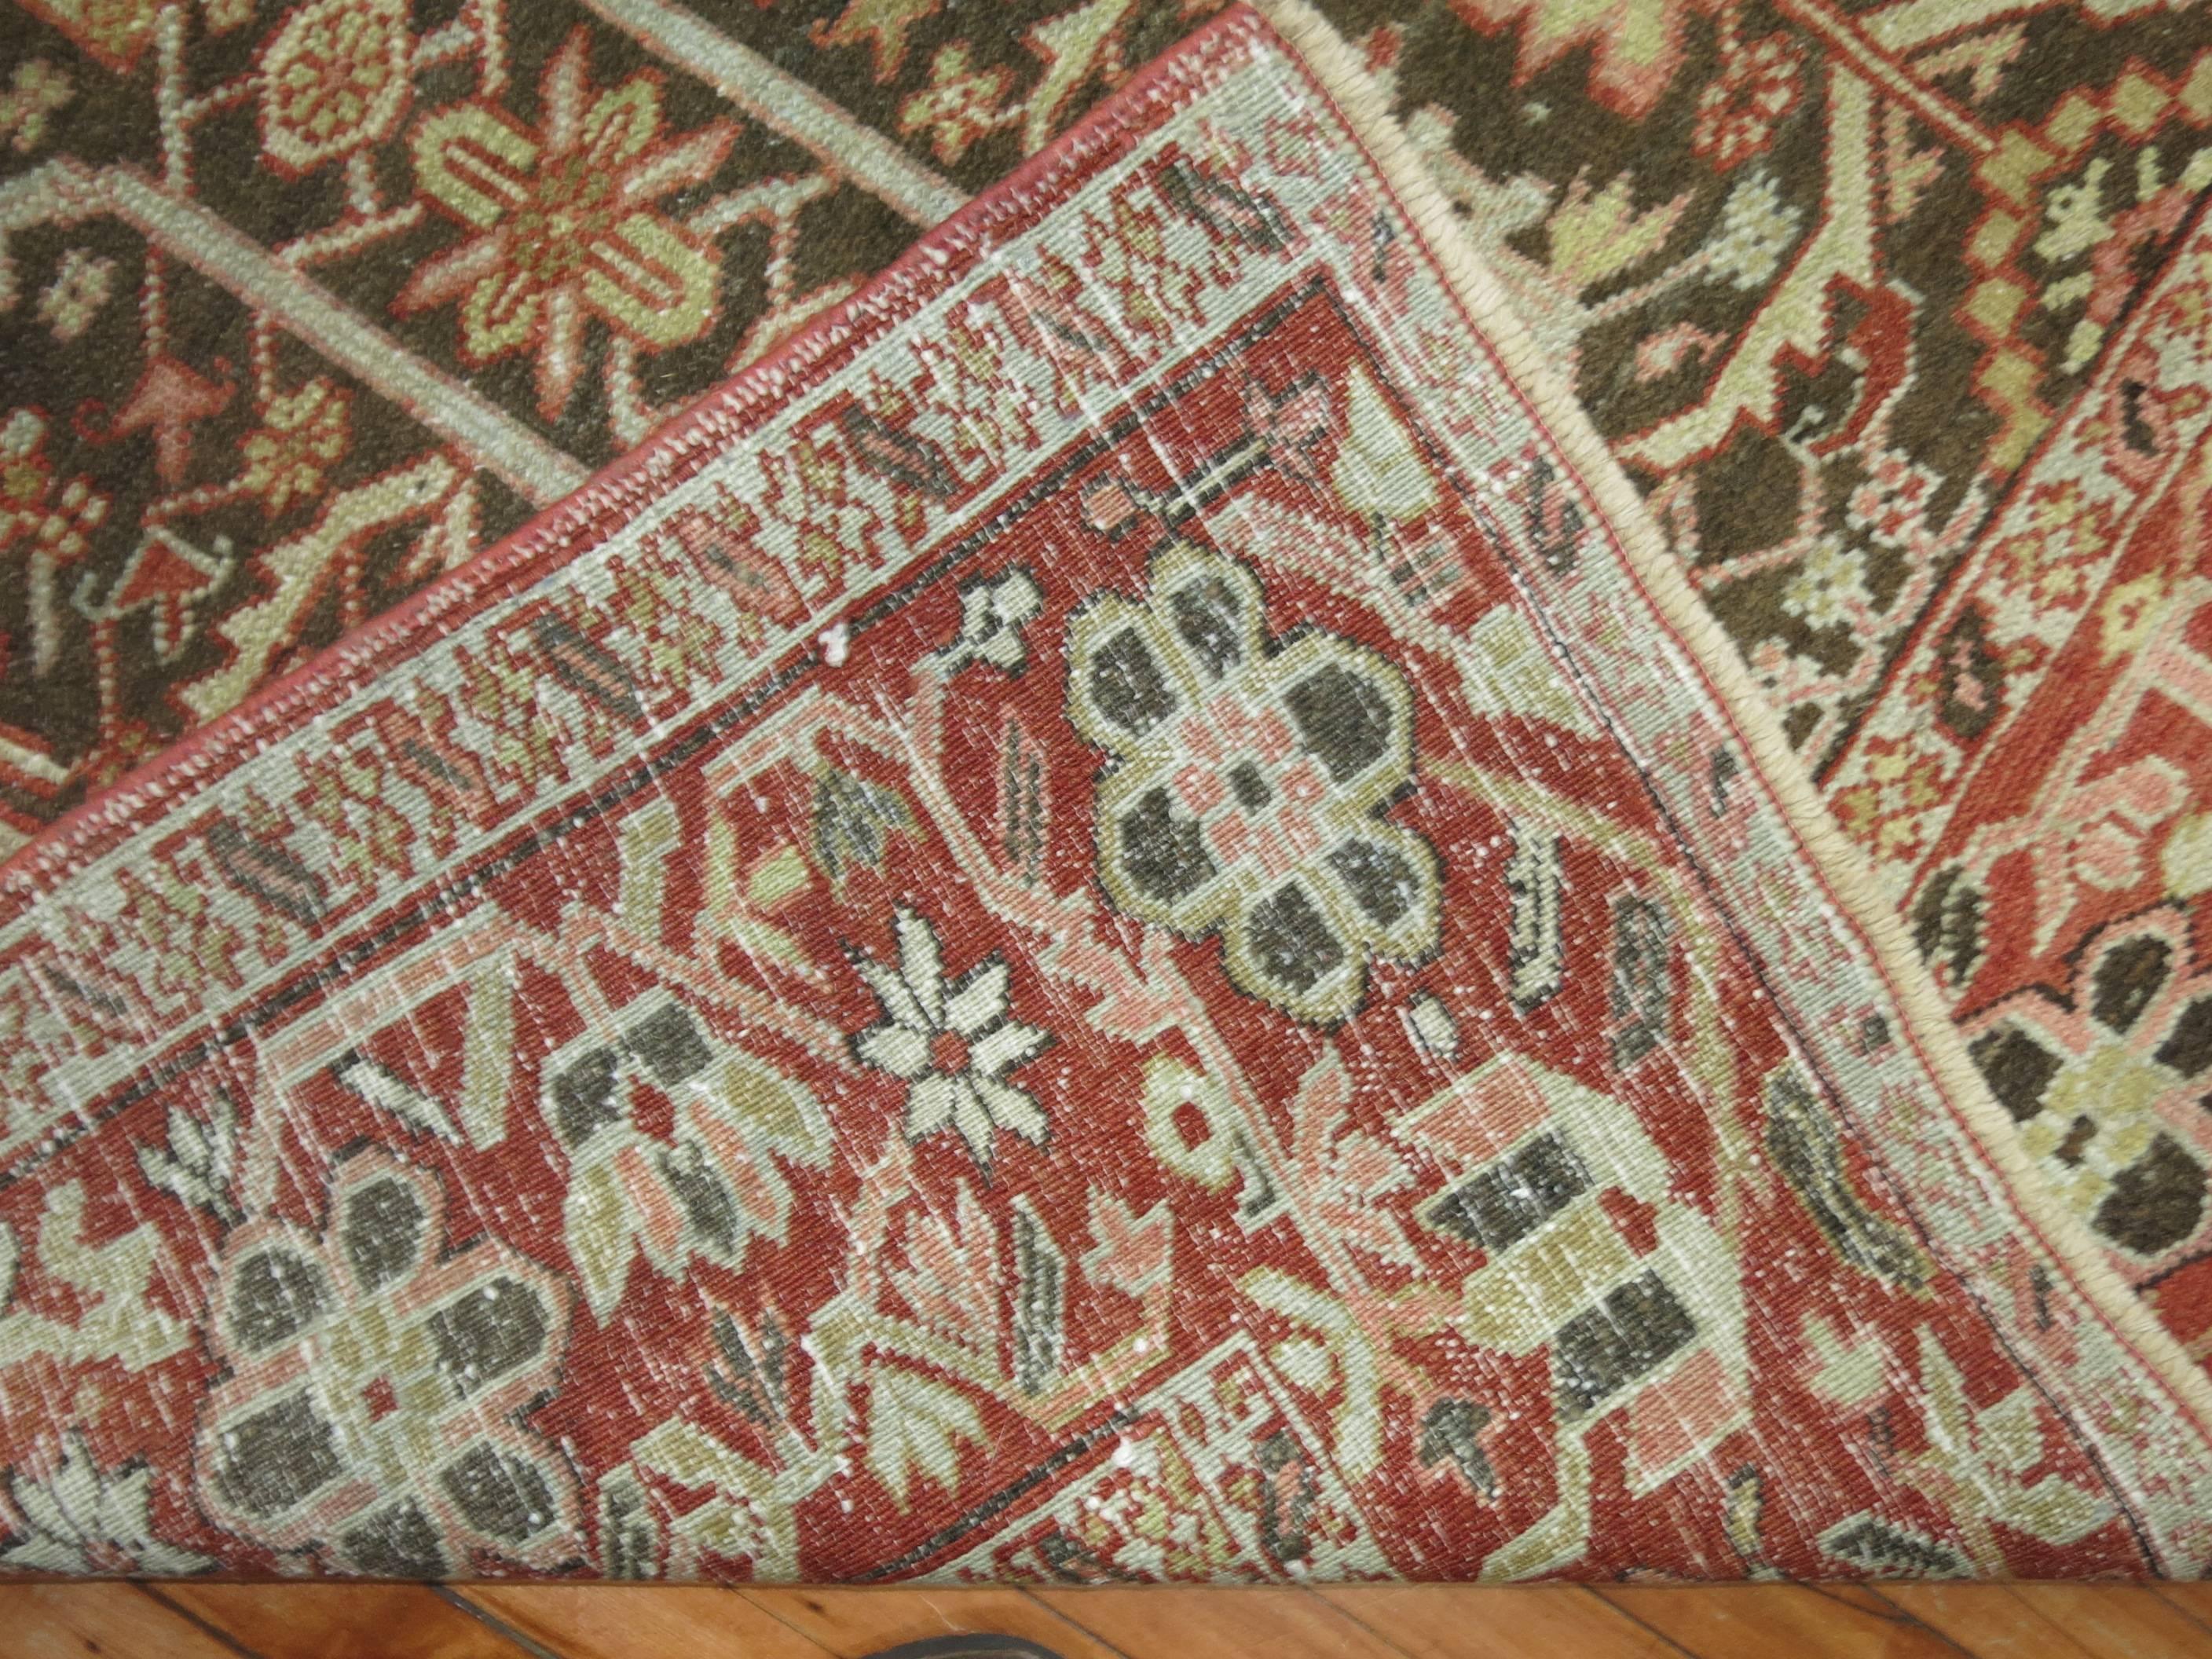 An early 20th-century Northwest Persian Heriz rug

Measures: 9' x 11'8''

The best early 20th century decorative antique Persian Heriz carpets are found in their design, style and color. Older antique Heriz rugs, echoing the famous antique 19th